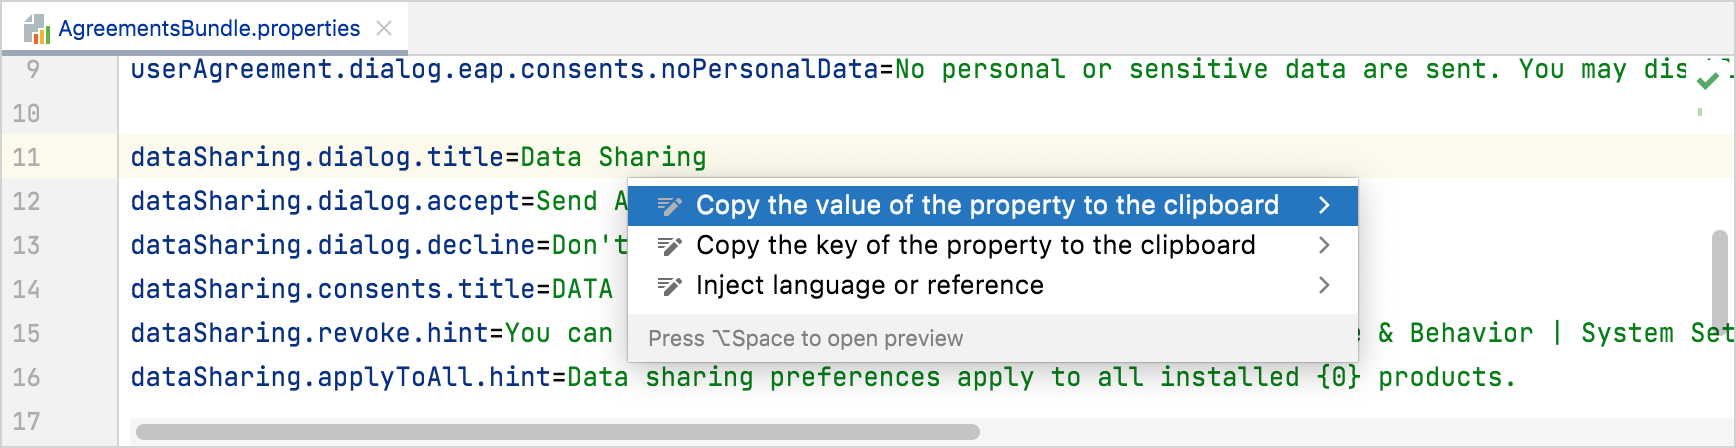 Context actions to copy the key and value of a property